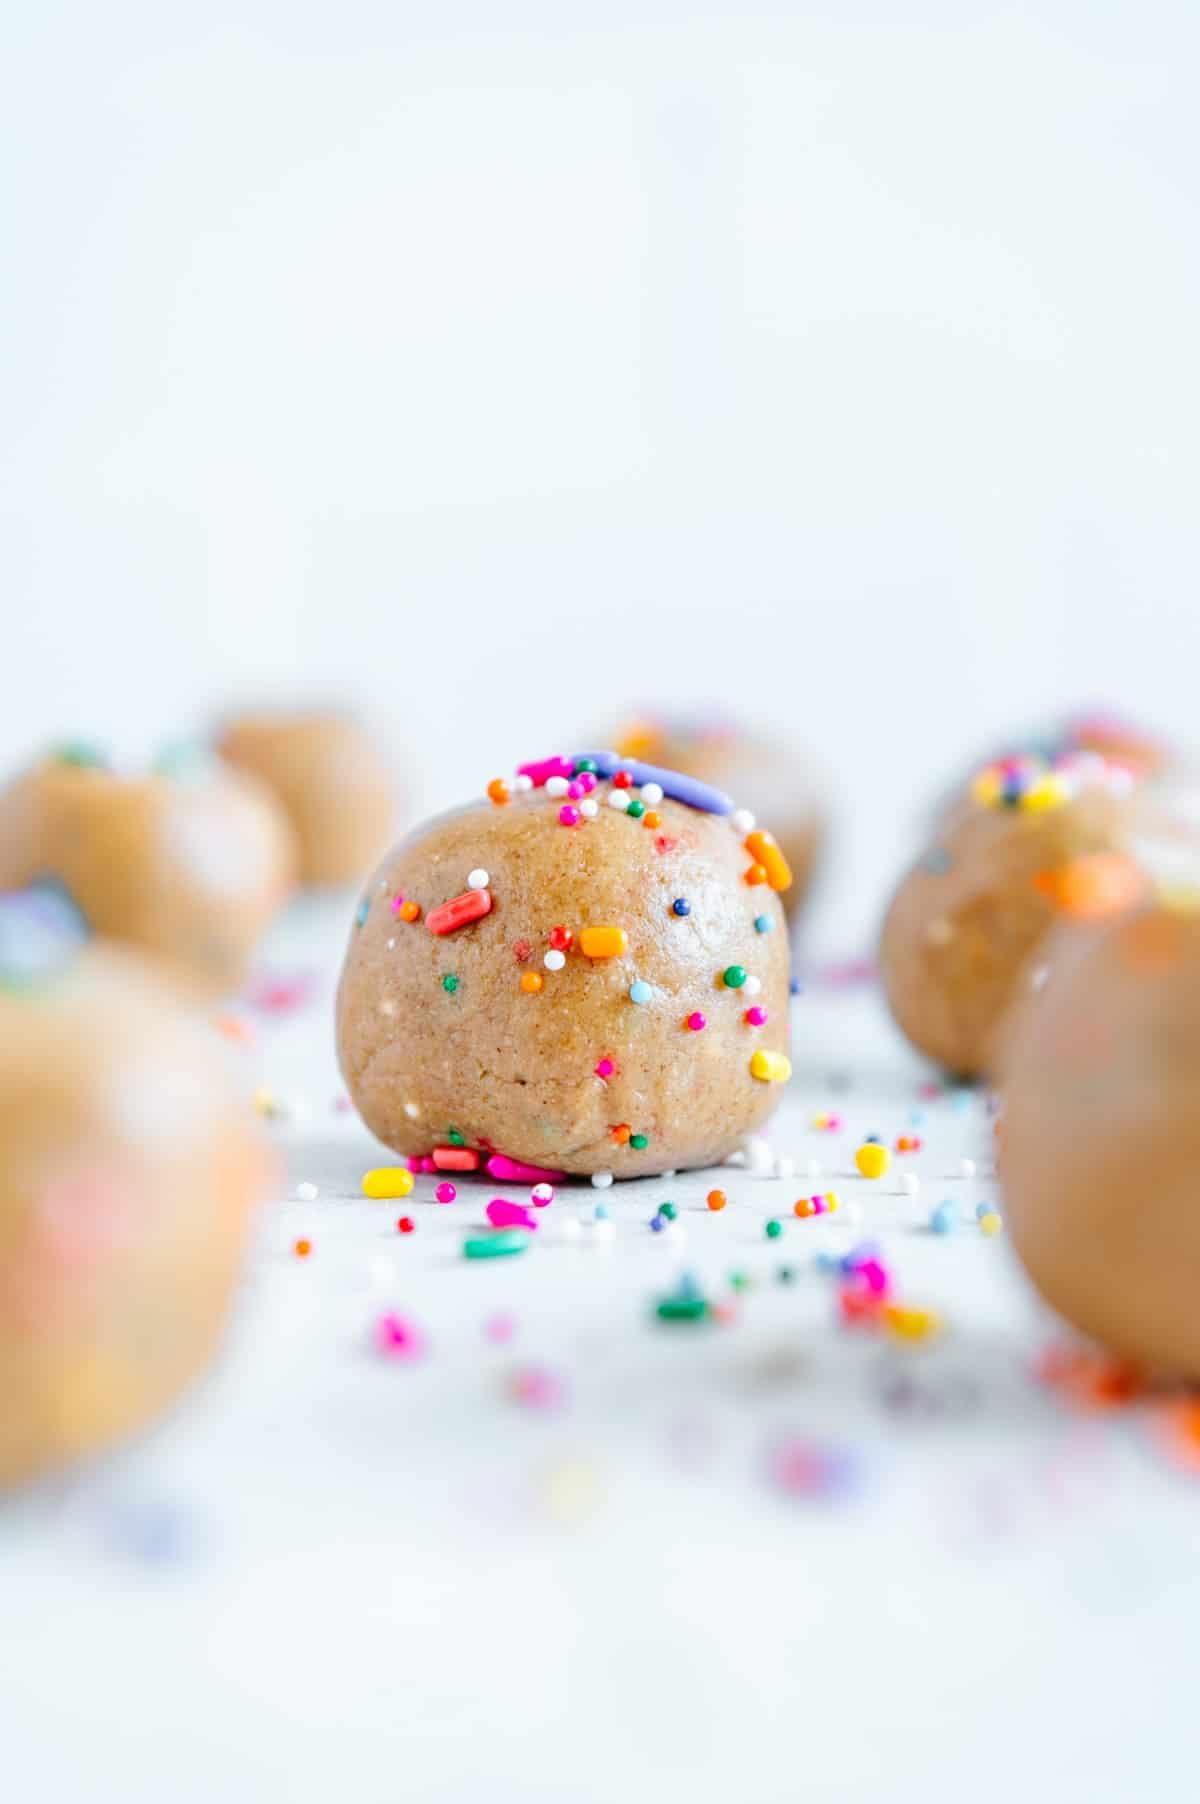 Upclose of a funfetti bite rolled in sprinkles.